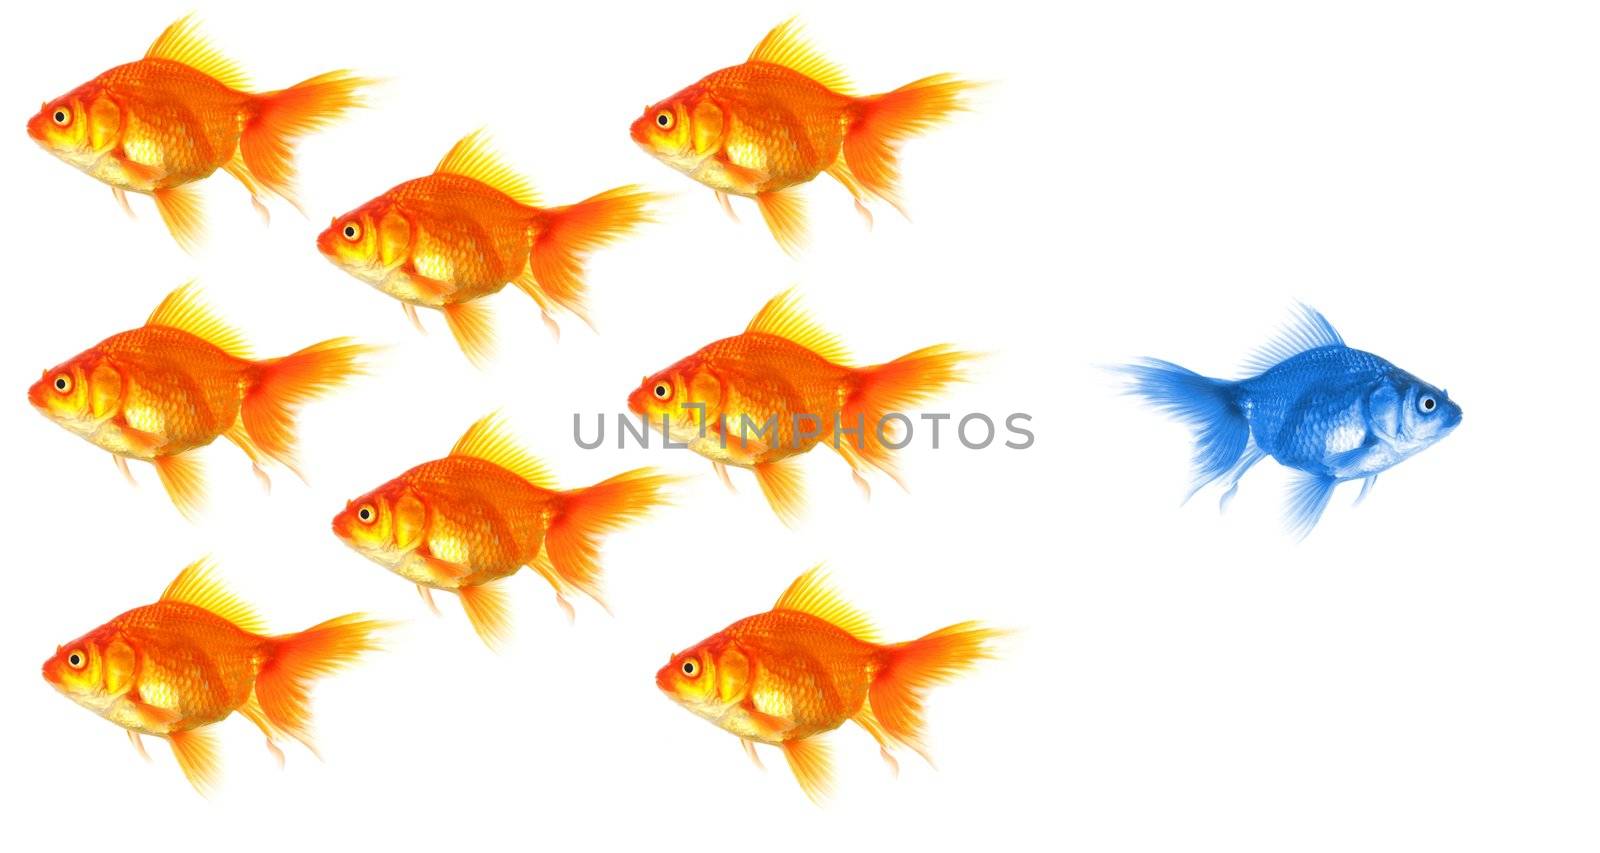 goldfish showing leader individuality success or motivation concept